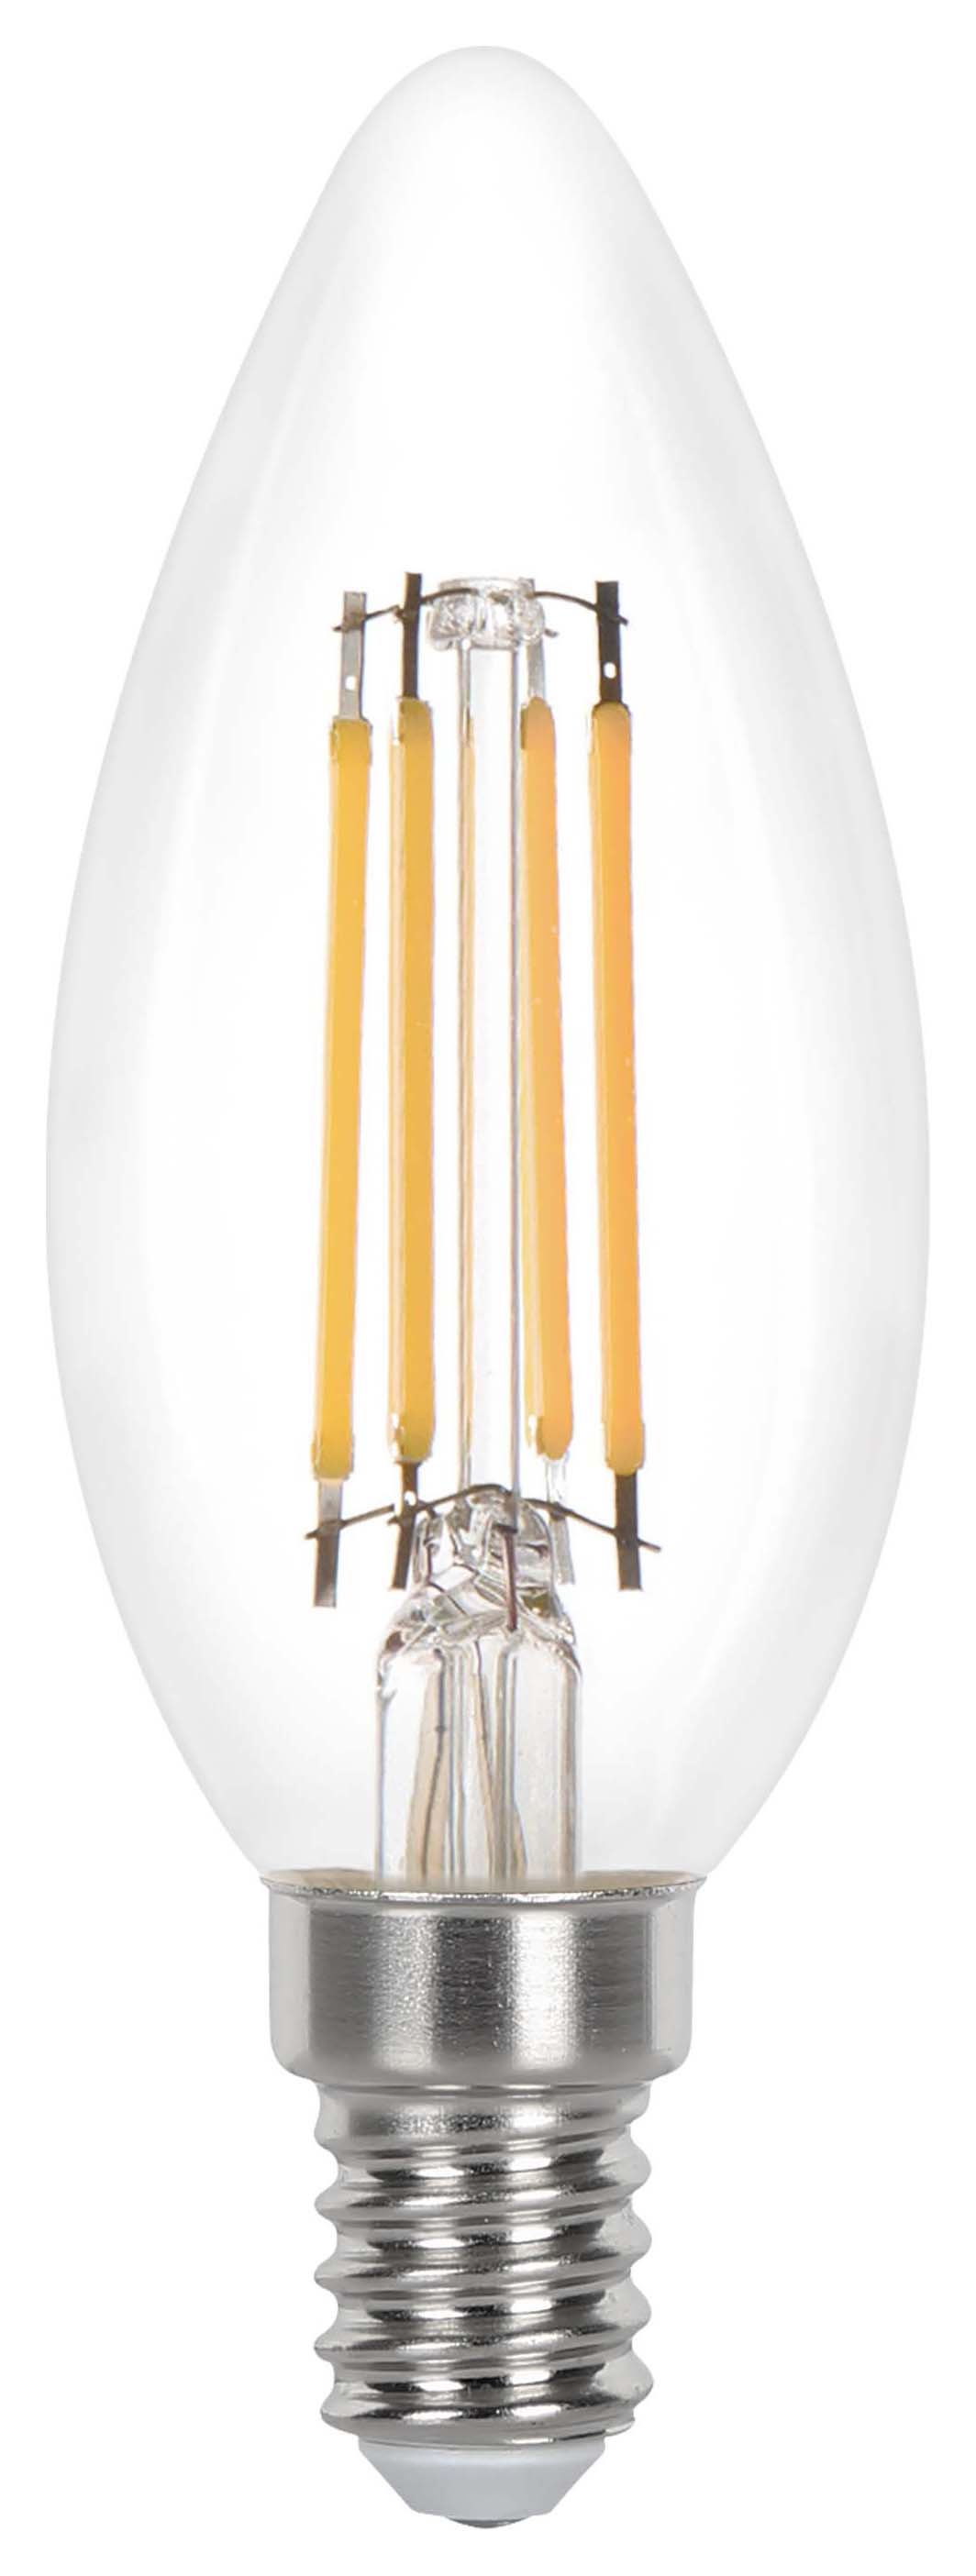 Image of Wickes Non-Dimmable Filament E14 Candle 3.4W Warm White Light Bulb - Pack of 4